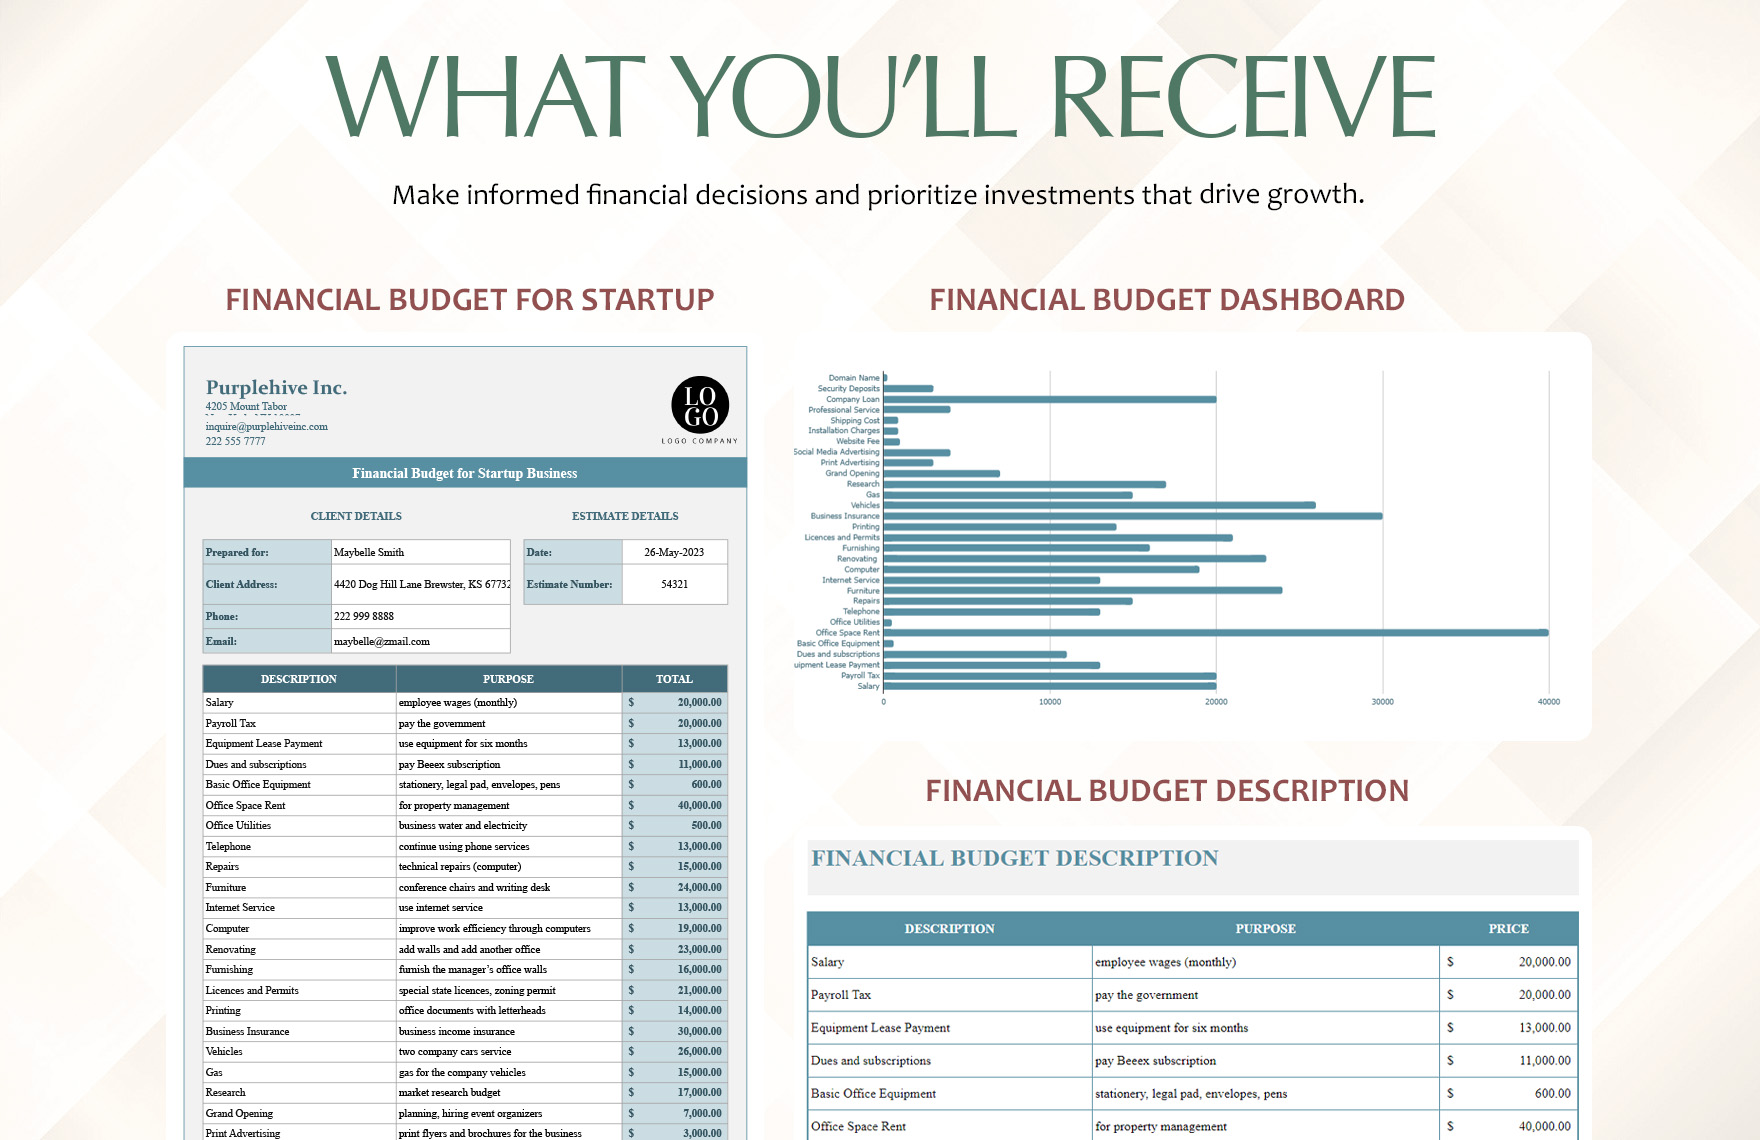 Financial Budget for Startup Business Template